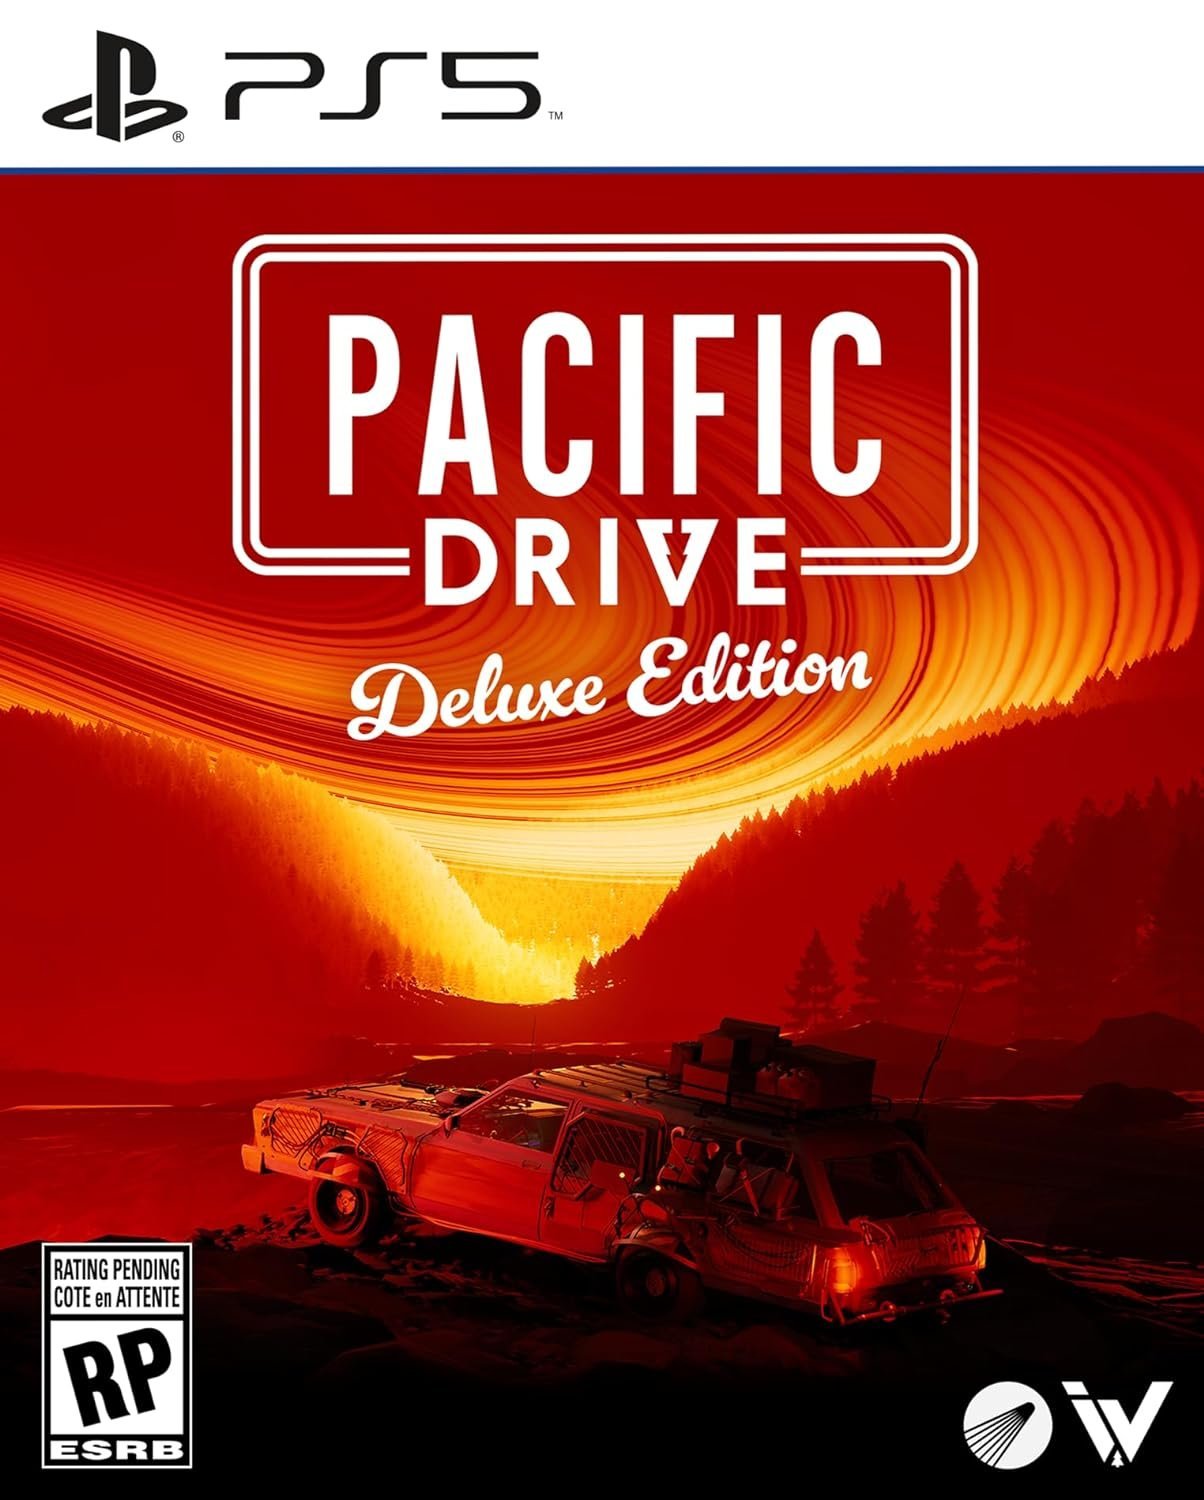 Pacific Drive on Steam